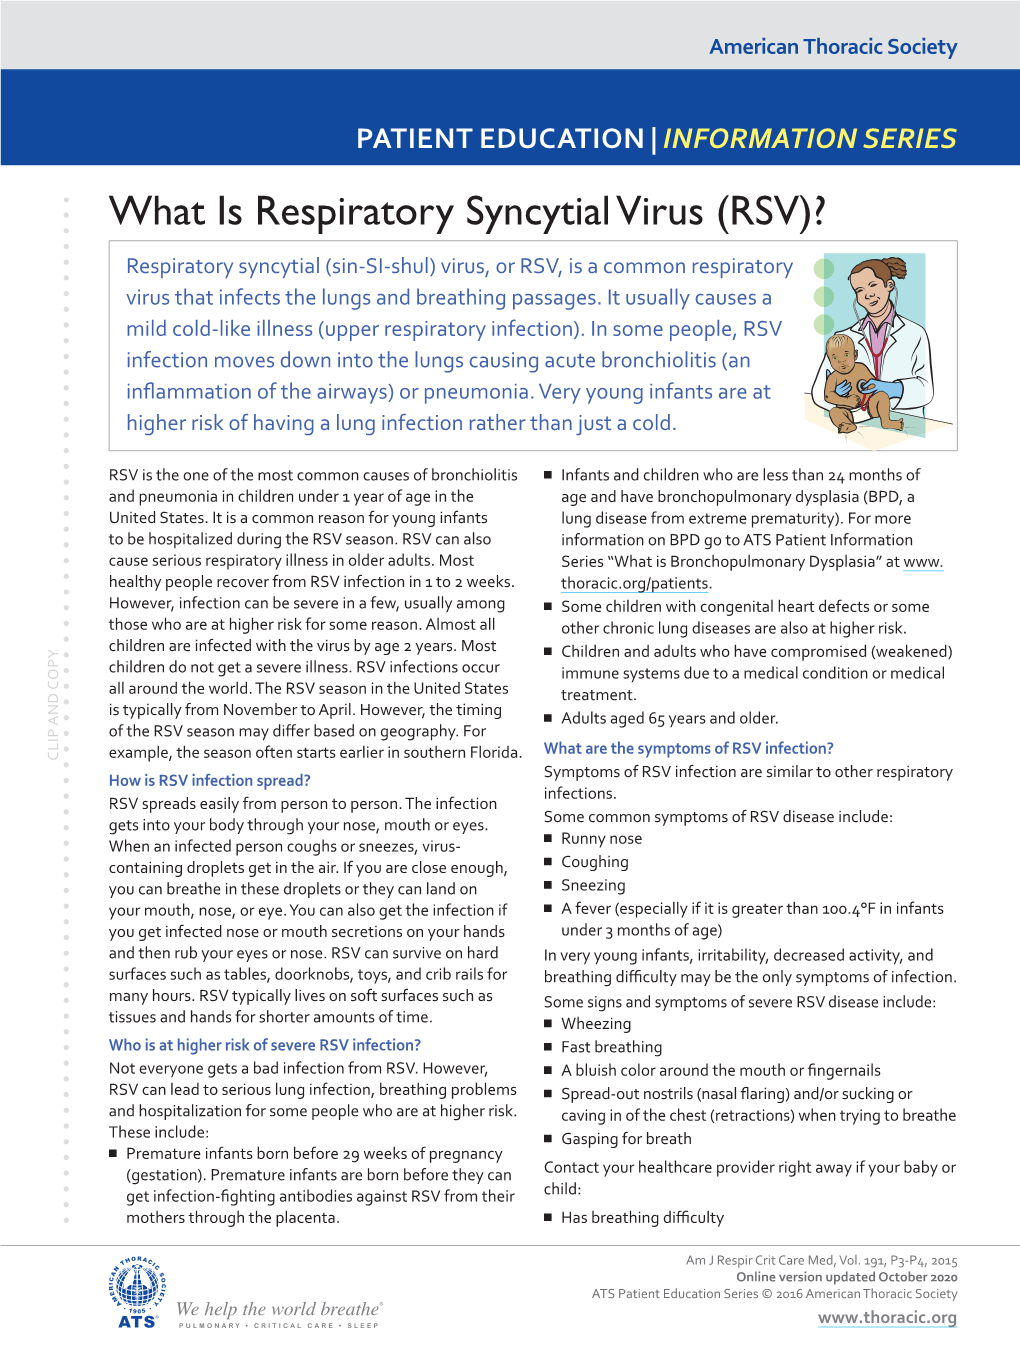 What Is Respiratory Syncytial Virus (RSV)?